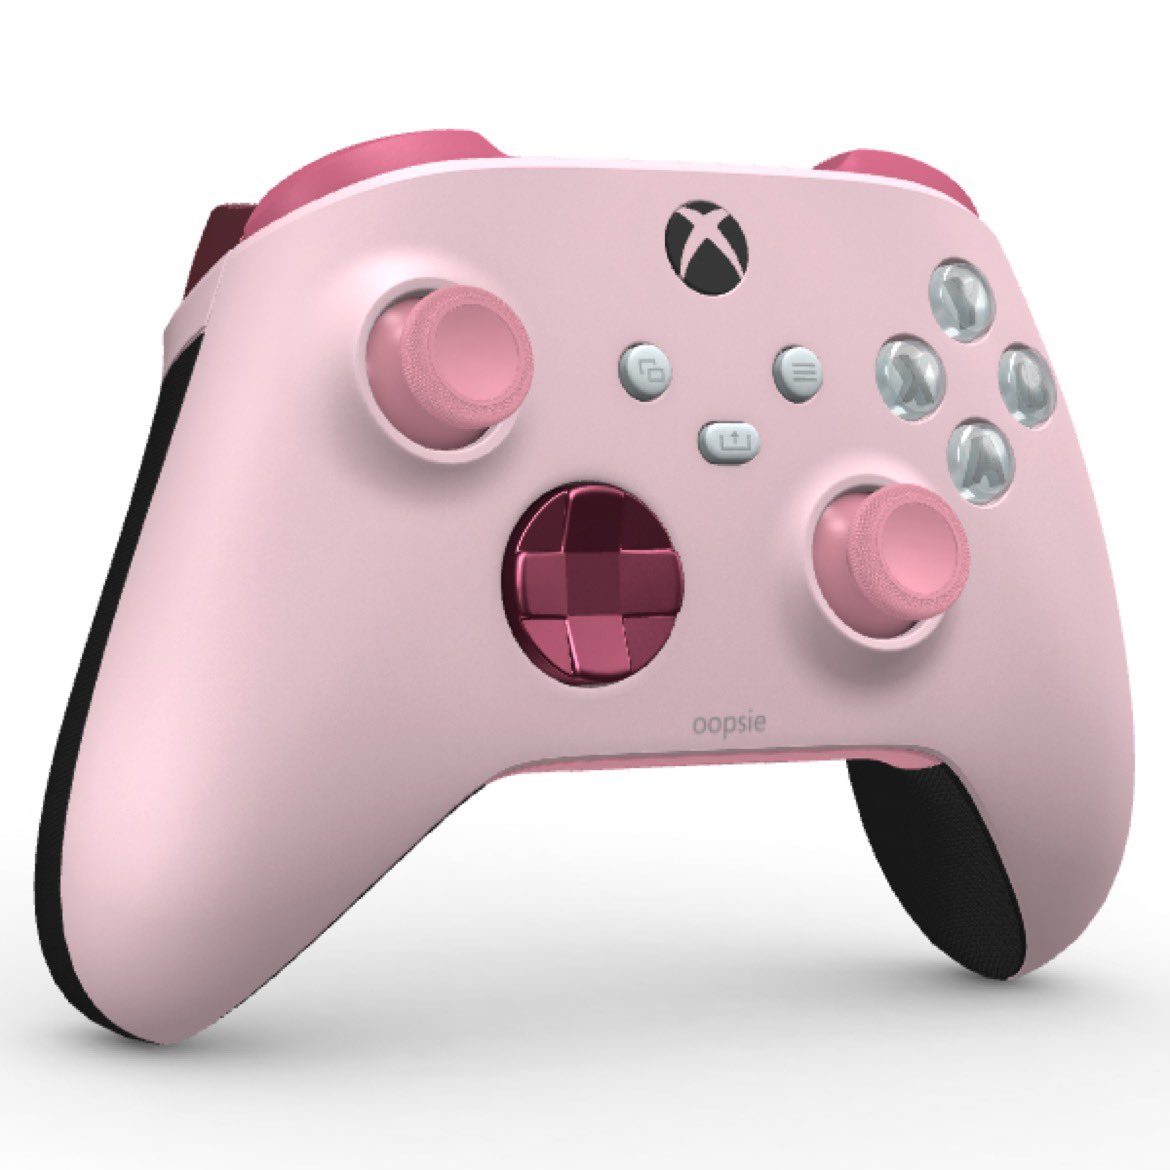 Amanda Yeo on X: "making the most of xbox design lab's new soft pink  option. player 2 is “my bad” https://t.co/azN8nLtsCS" / X